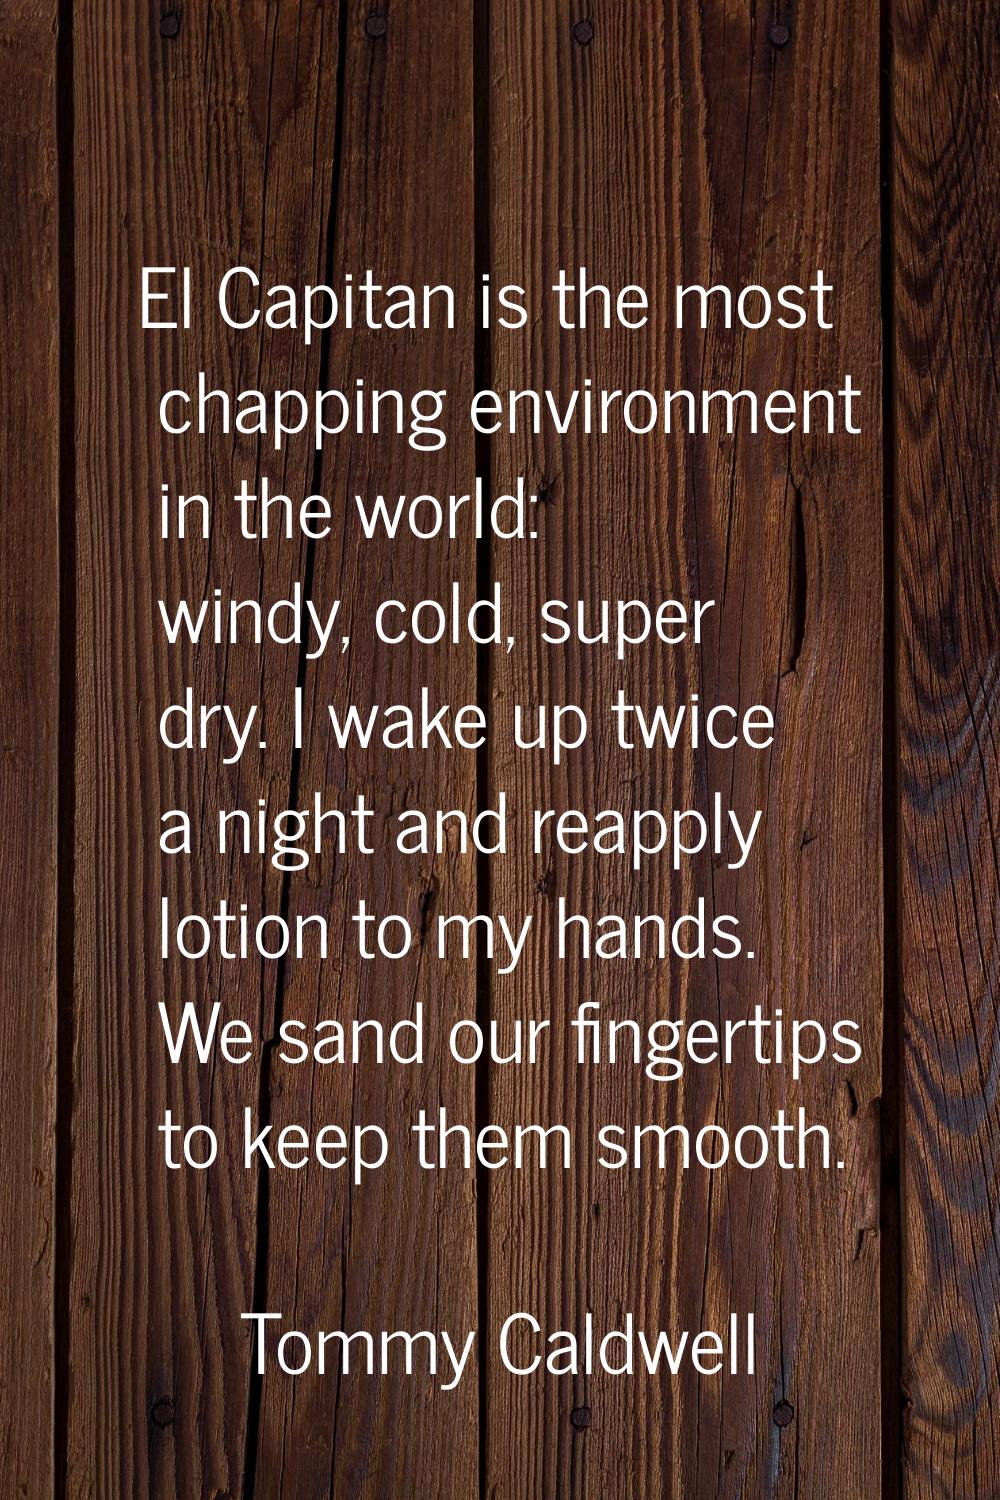 El Capitan is the most chapping environment in the world: windy, cold, super dry. I wake up twice a